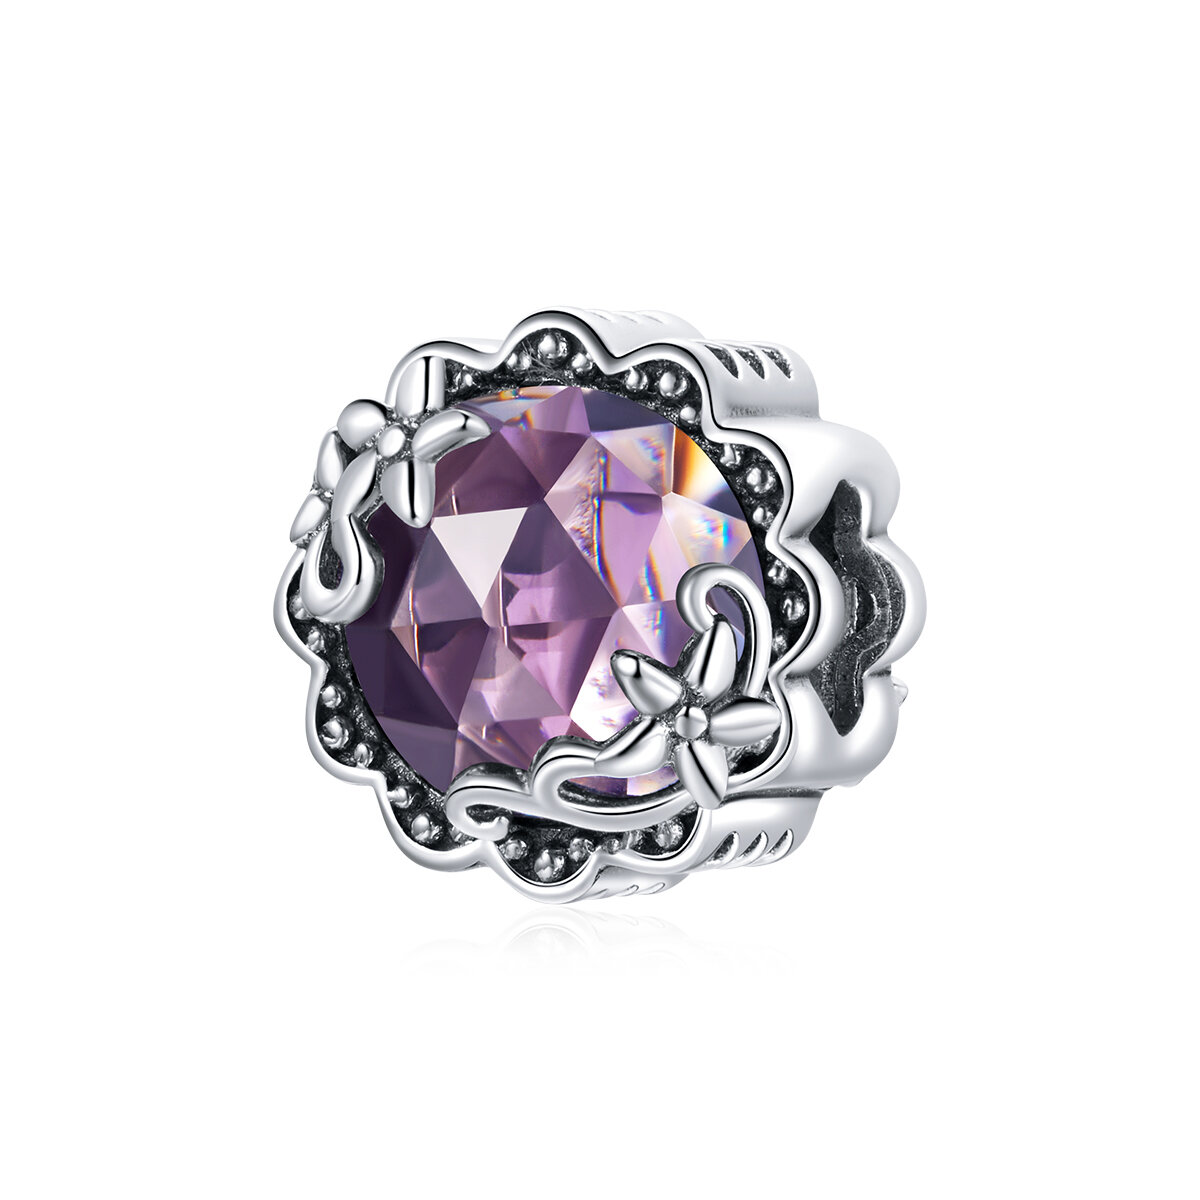 GemKing Dreamy Purple glass S925 Sterling Silver Charms